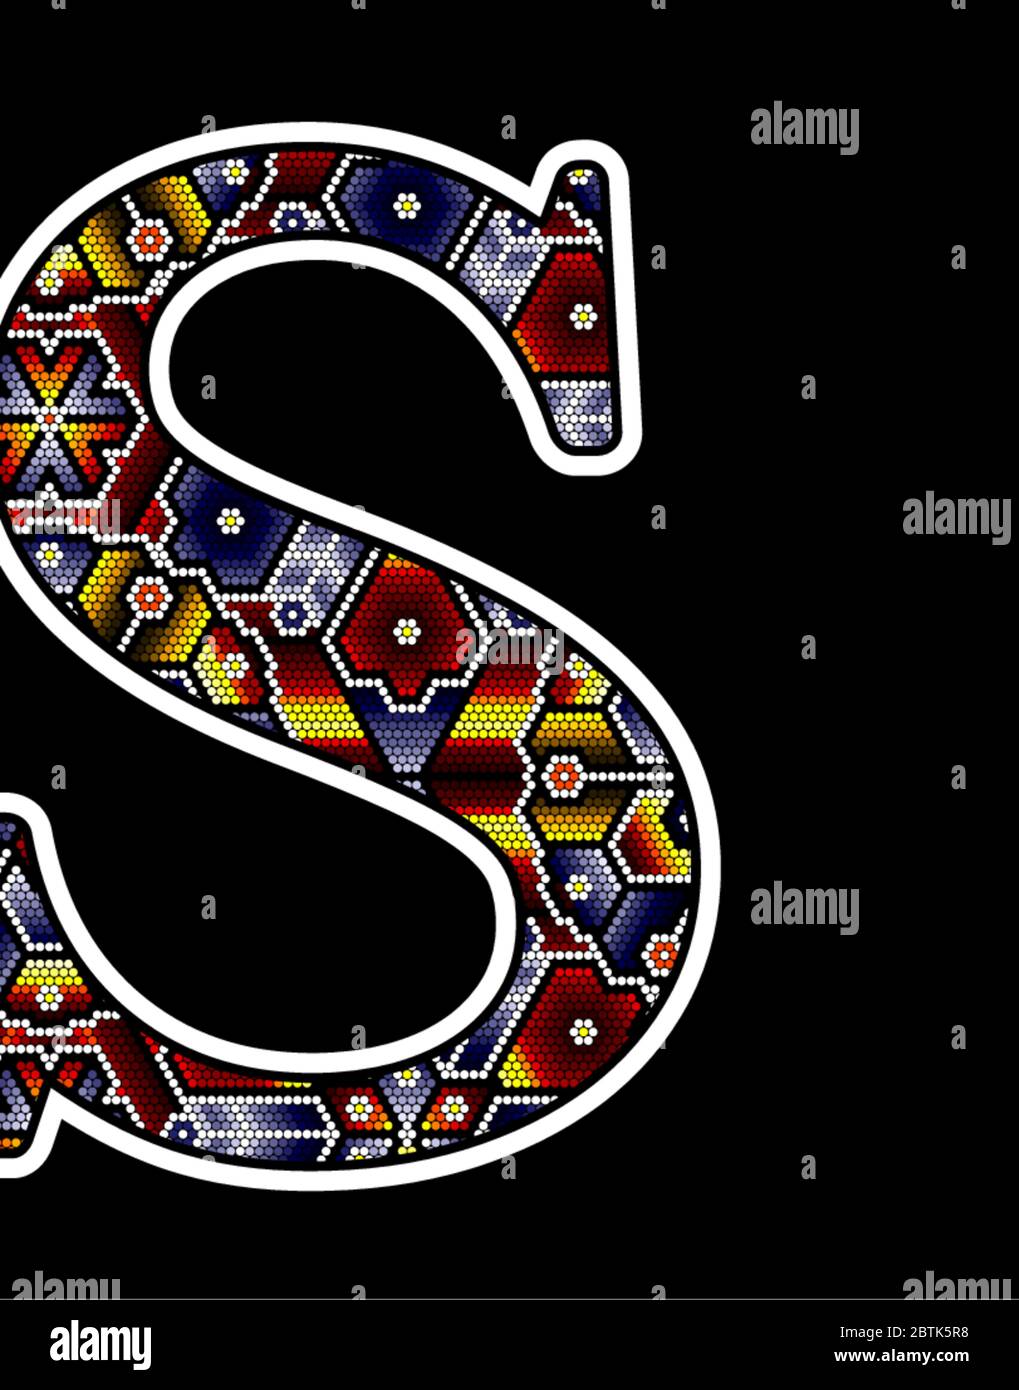 initial capital letter S with colorful dots. Abstract design inspired in mexican huichol beaded craft art style. Isolated on black background Stock Vector